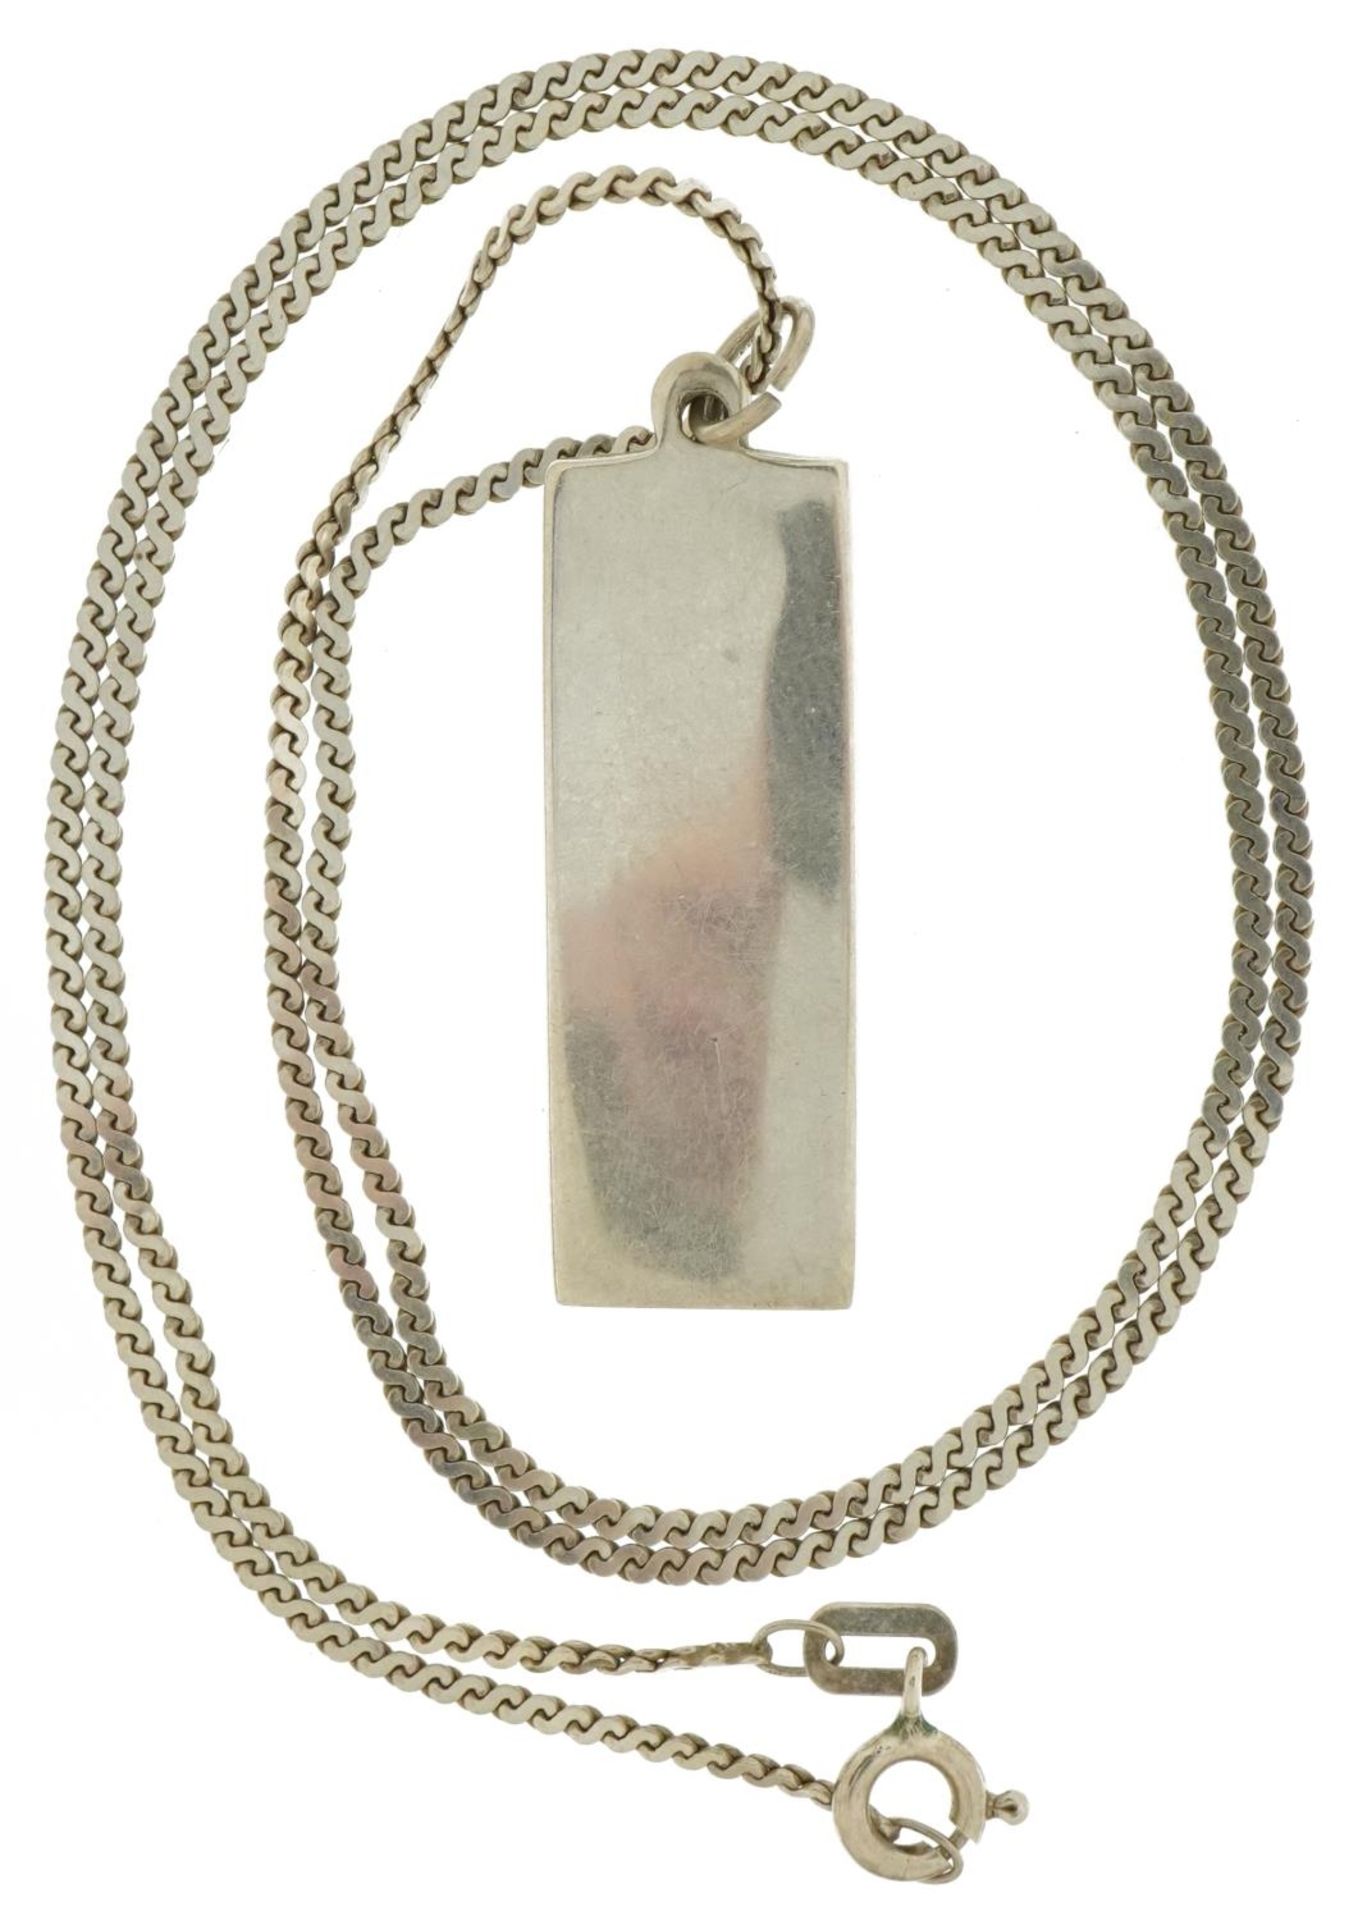 Silver ingot pendant on a silver S link necklace, 4.3cm high and 60cm in length, 21.8g : For further - Image 3 of 3